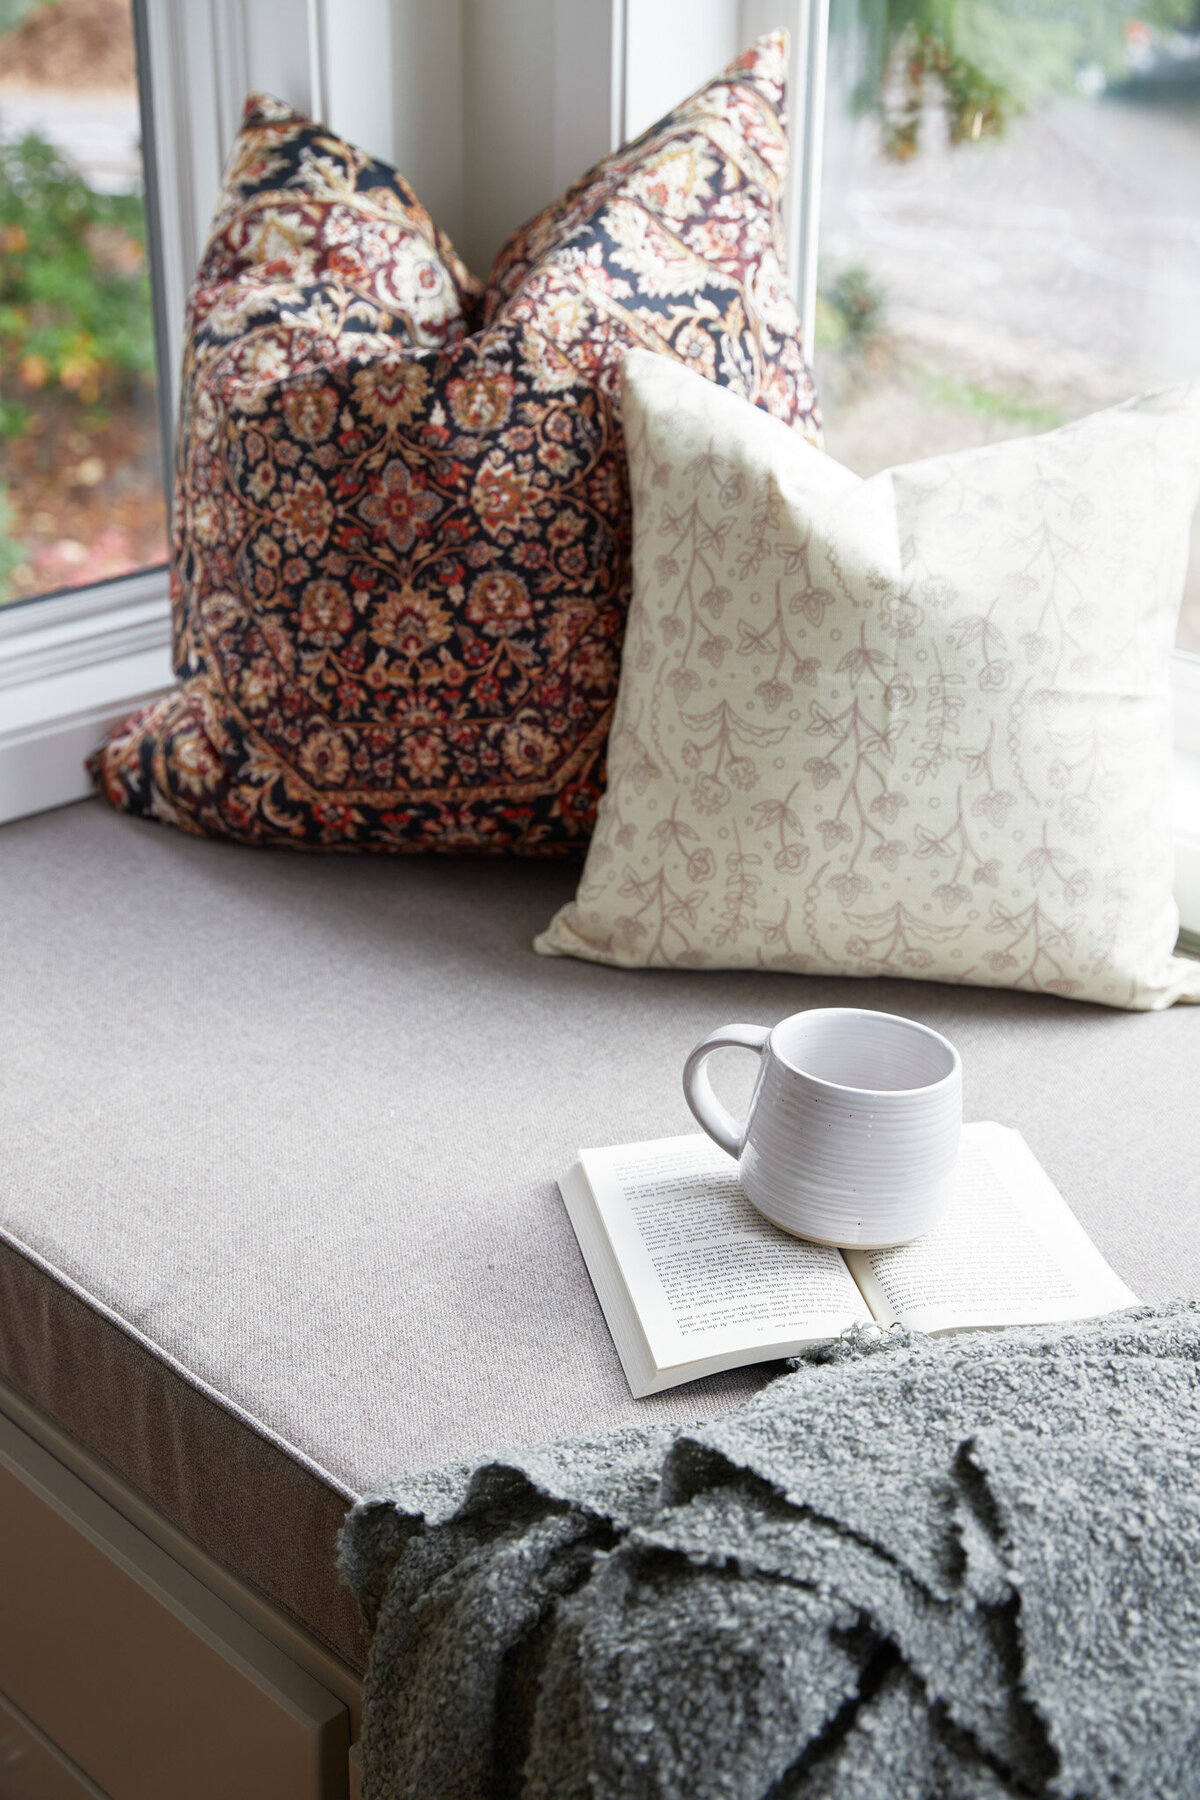 Window seat with brown wooden base with 4 drawers and silver knobs. Taupe cushion on top with a green and gray blanket, an open book and a cup of coffee. 3 throw pillows in the corners that are floral and striped.